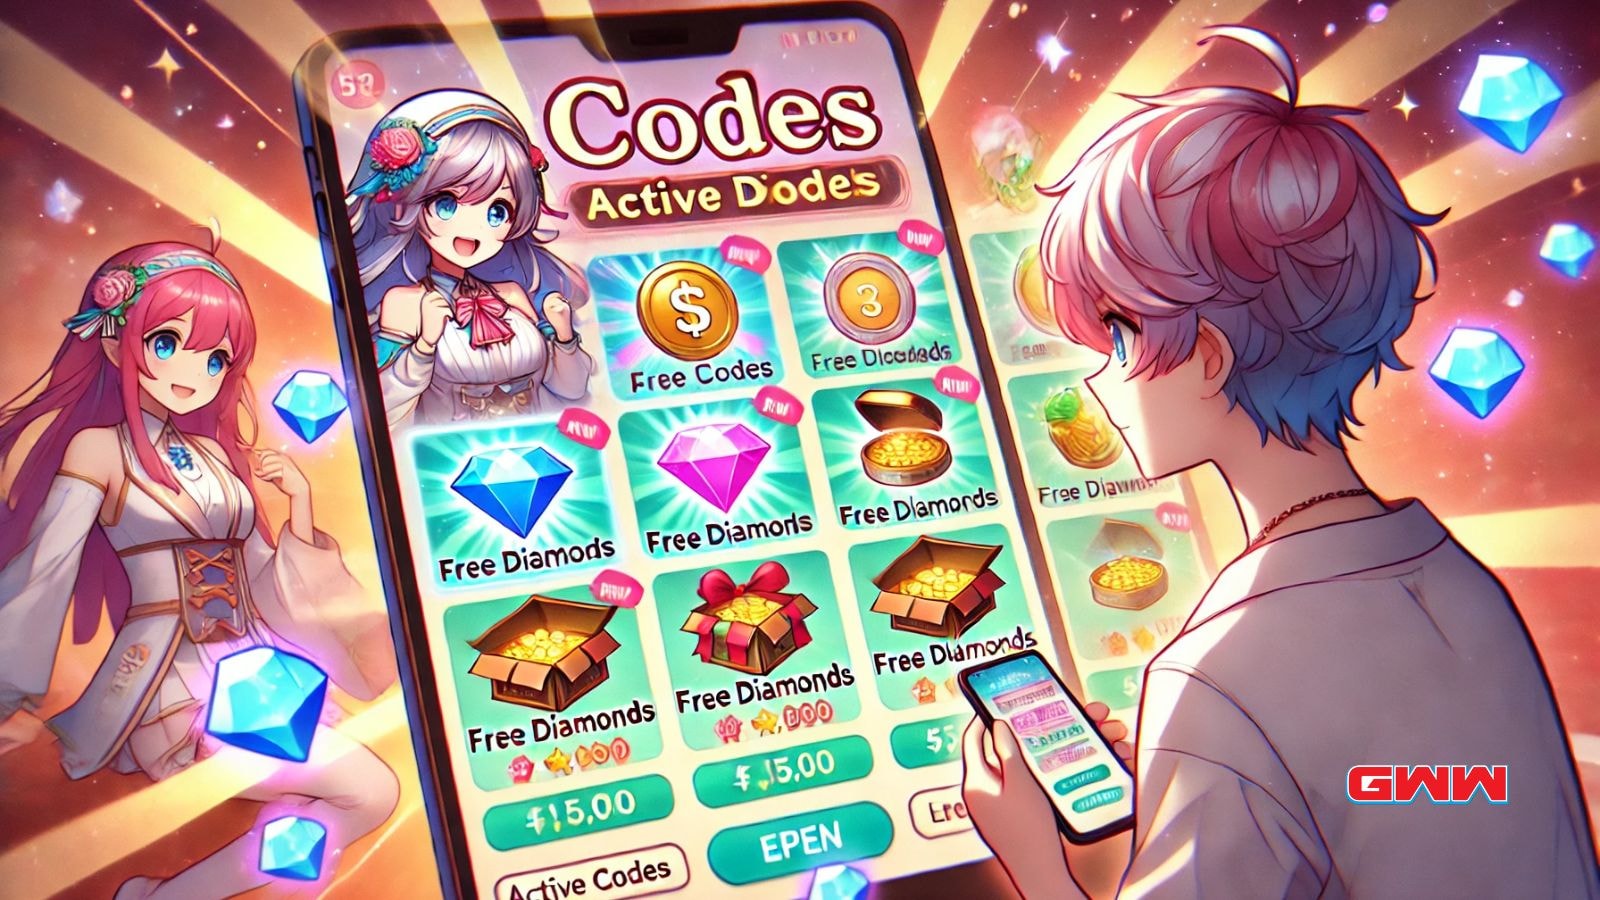 Anime Switch codes tab showing active codes and rewards